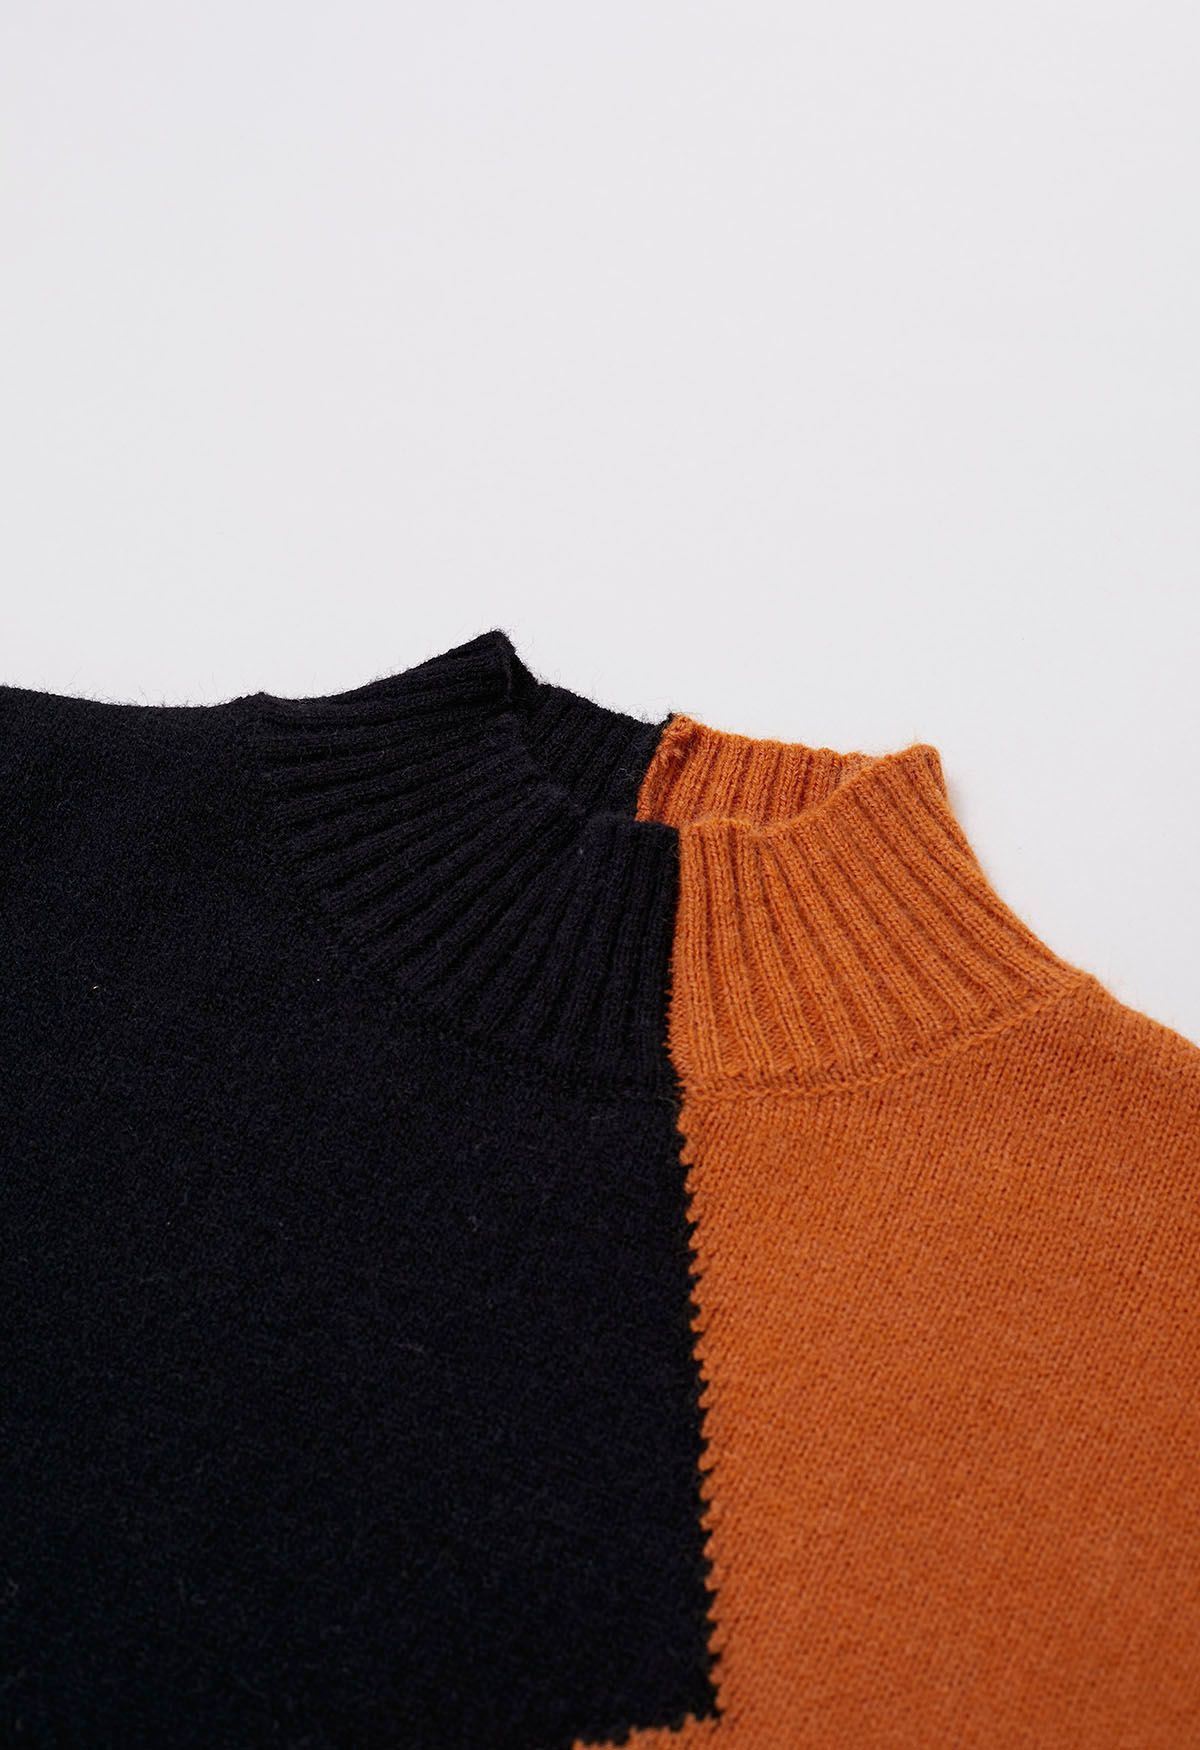 Whimsical Color Block Knit Sweater